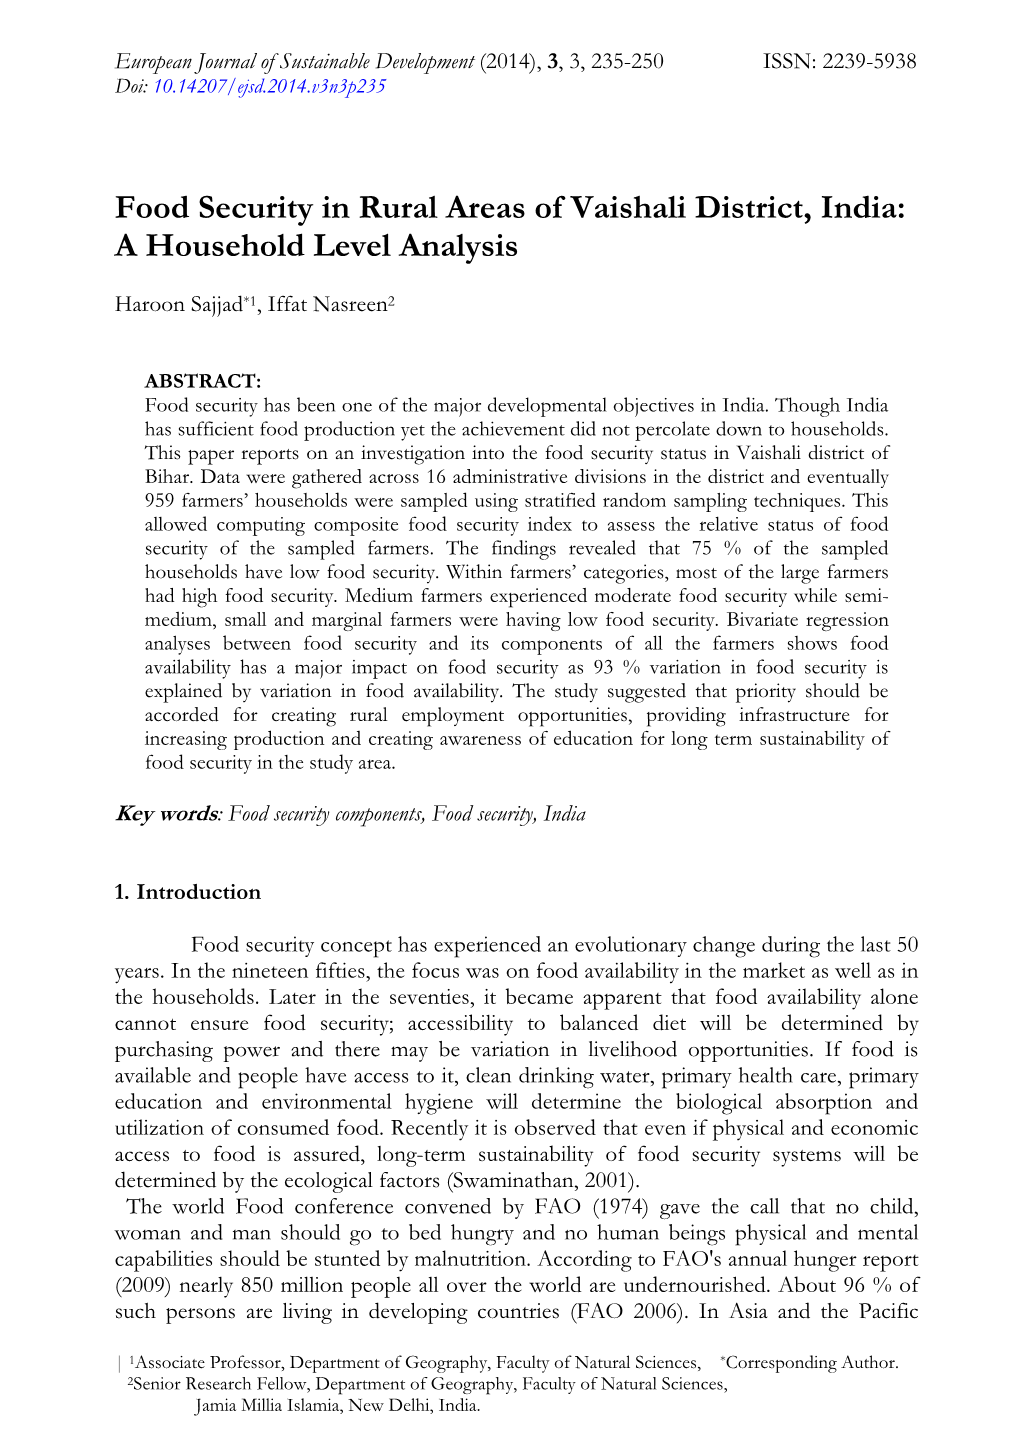 Food Security in Rural Areas of Vaishali District, India: a Household Level Analysis